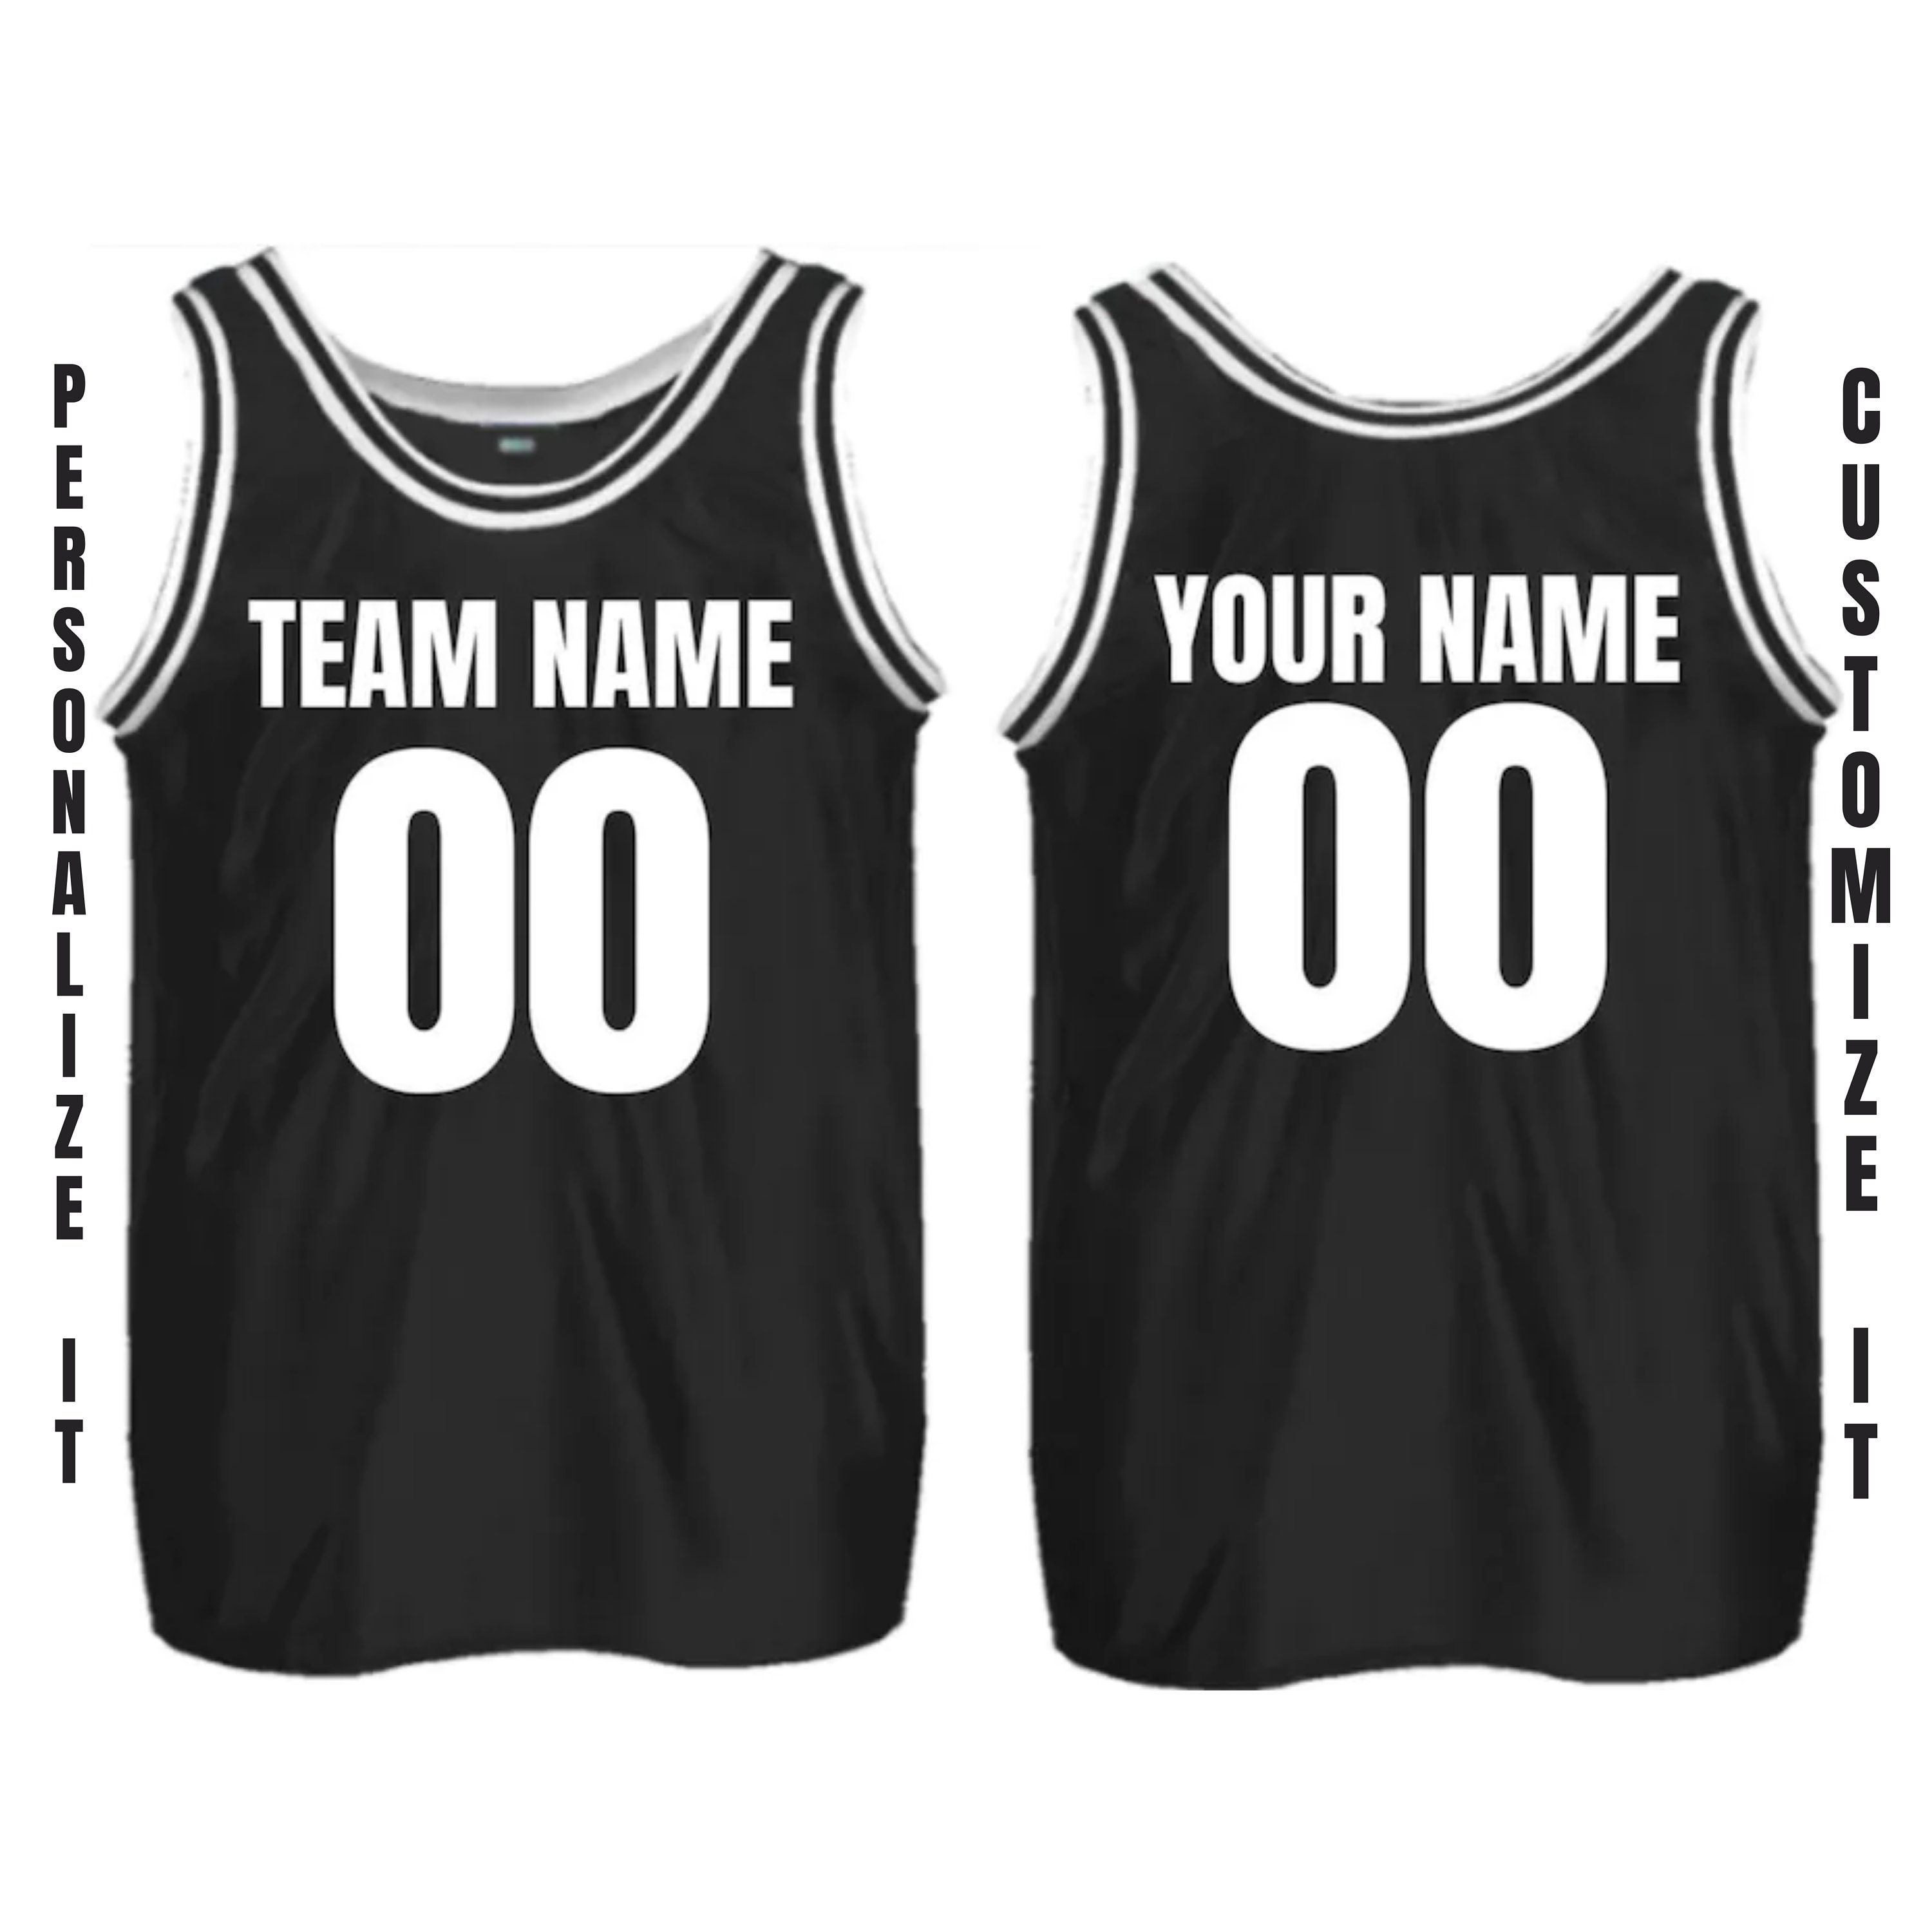 Customizable Basketball Jersey Vintage Style Wooden Sign